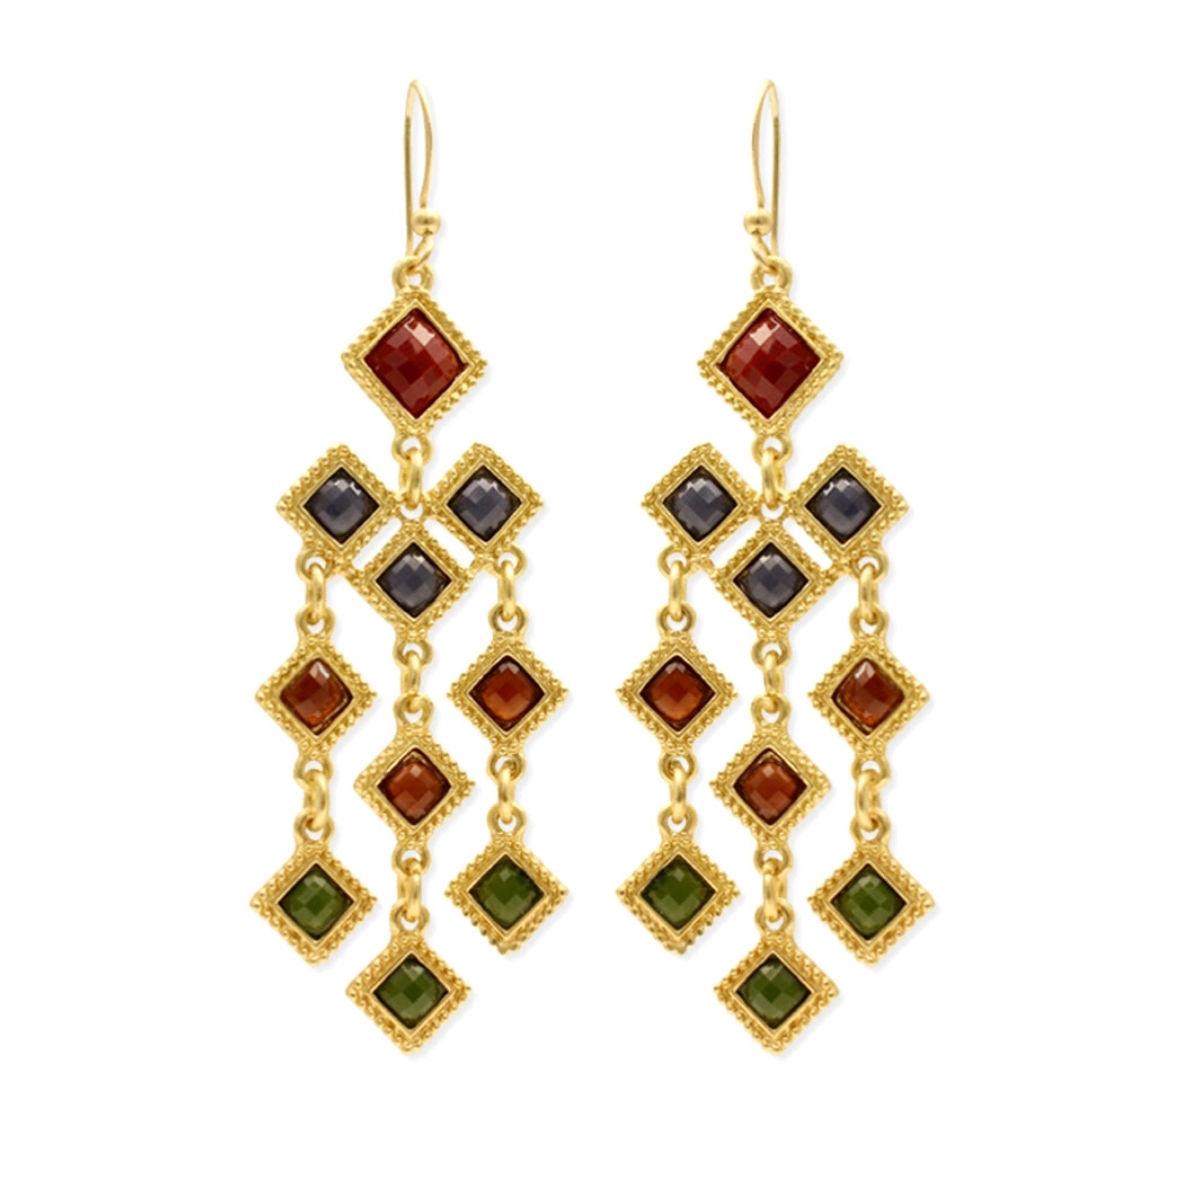 Discover Your New Favorite: Rhombus Cascade Statement Earrings